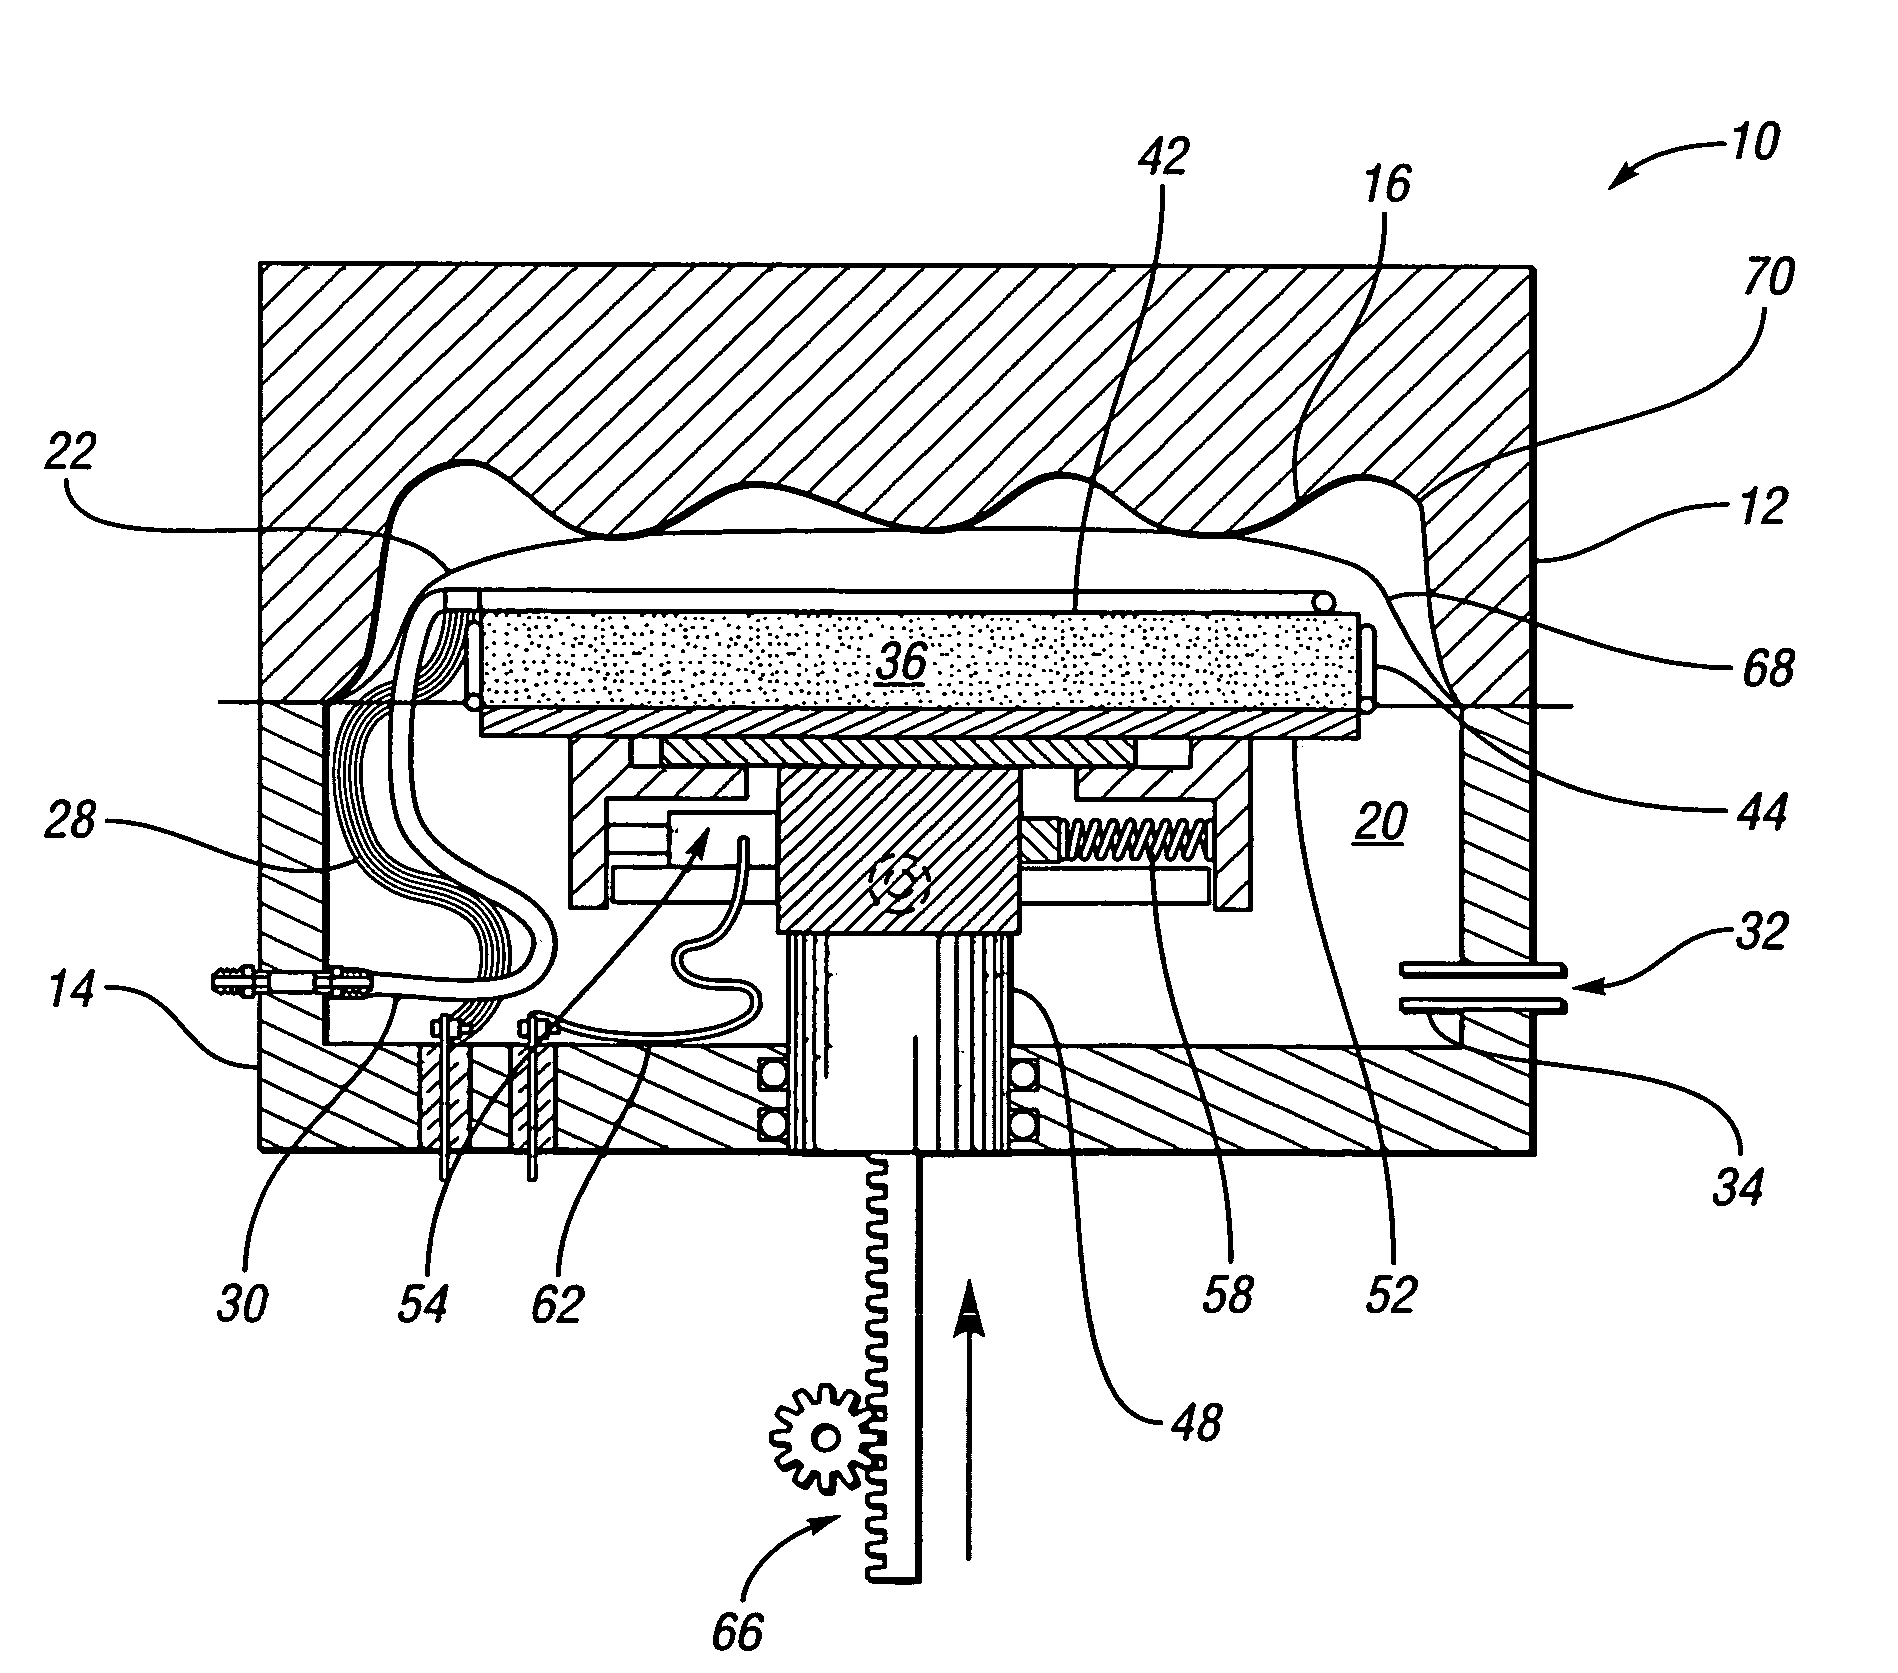 Apparatus and method for sheet material forming